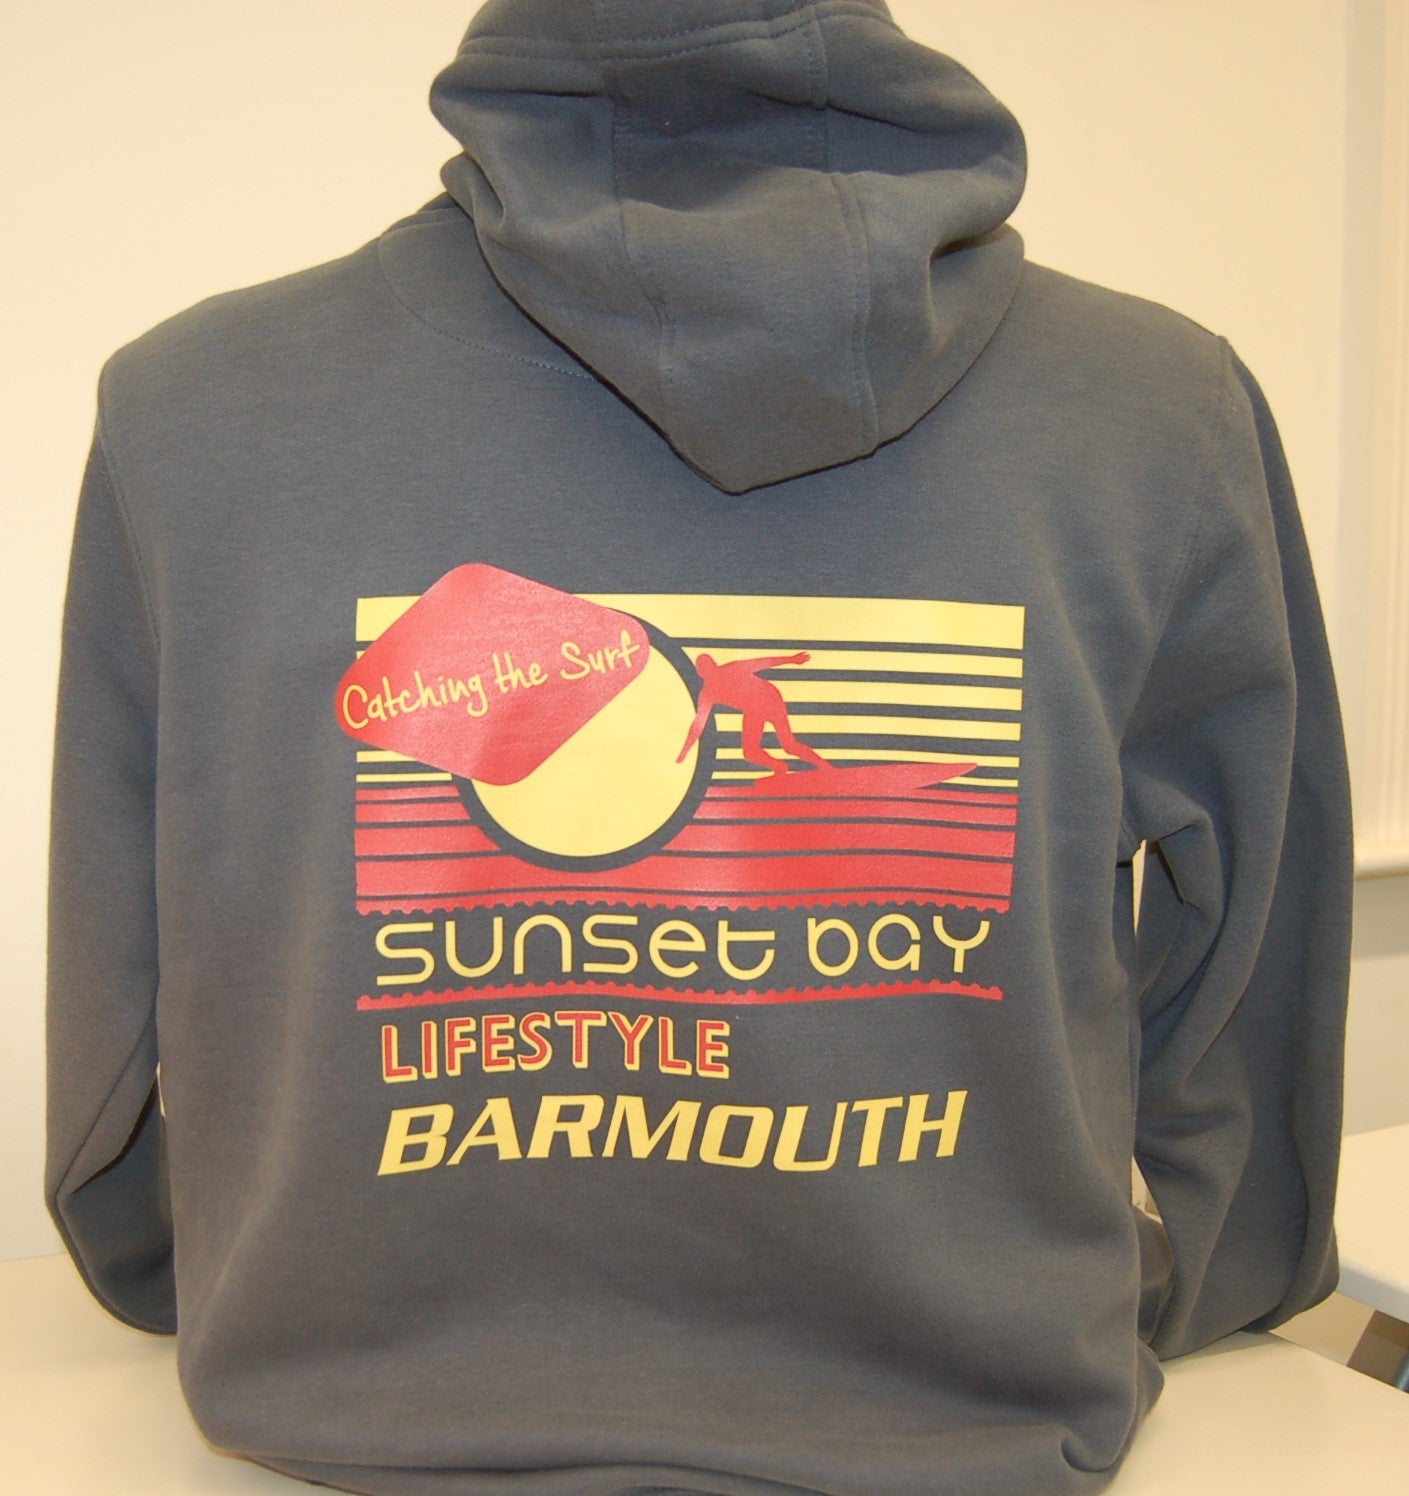 Barmouth Retro Surfer Print Unisex Adult Hoody in Charcoal Grey